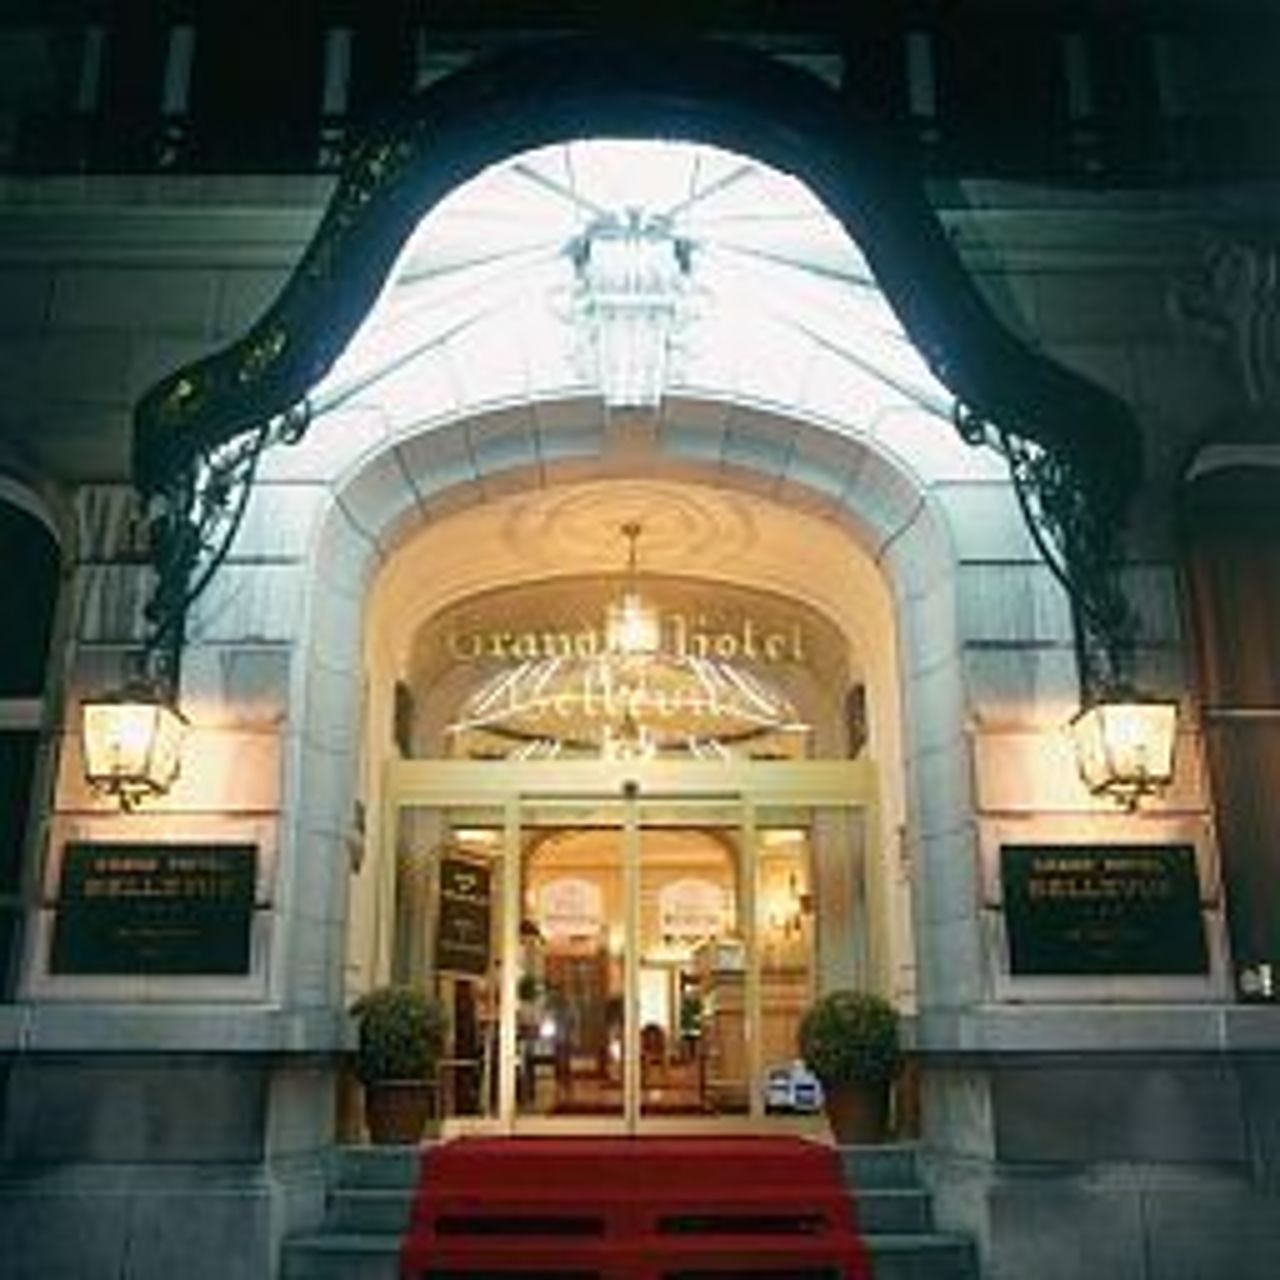 Grand Hotel Bellevue - Lille - Great prices at HOTEL INFO